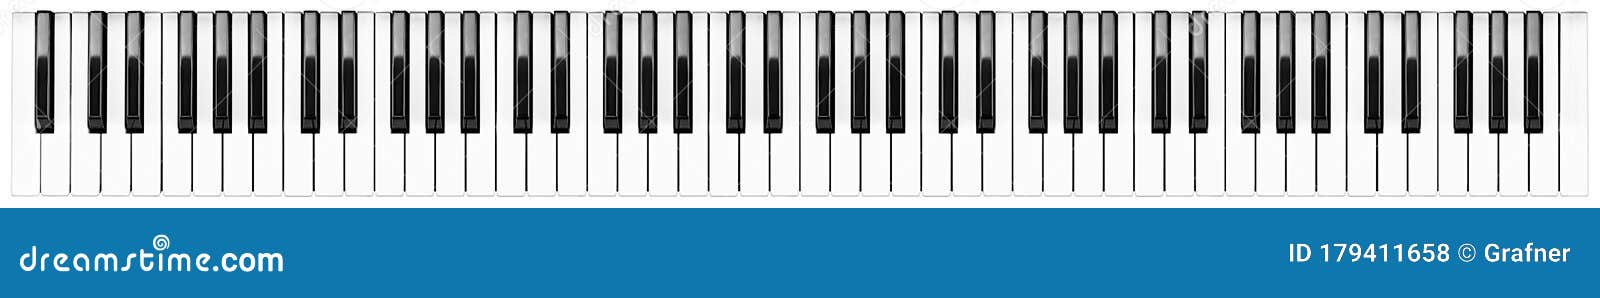 full grand piano 88 black white keys keyboard layout  white wide panorama banner background. classical music symphony